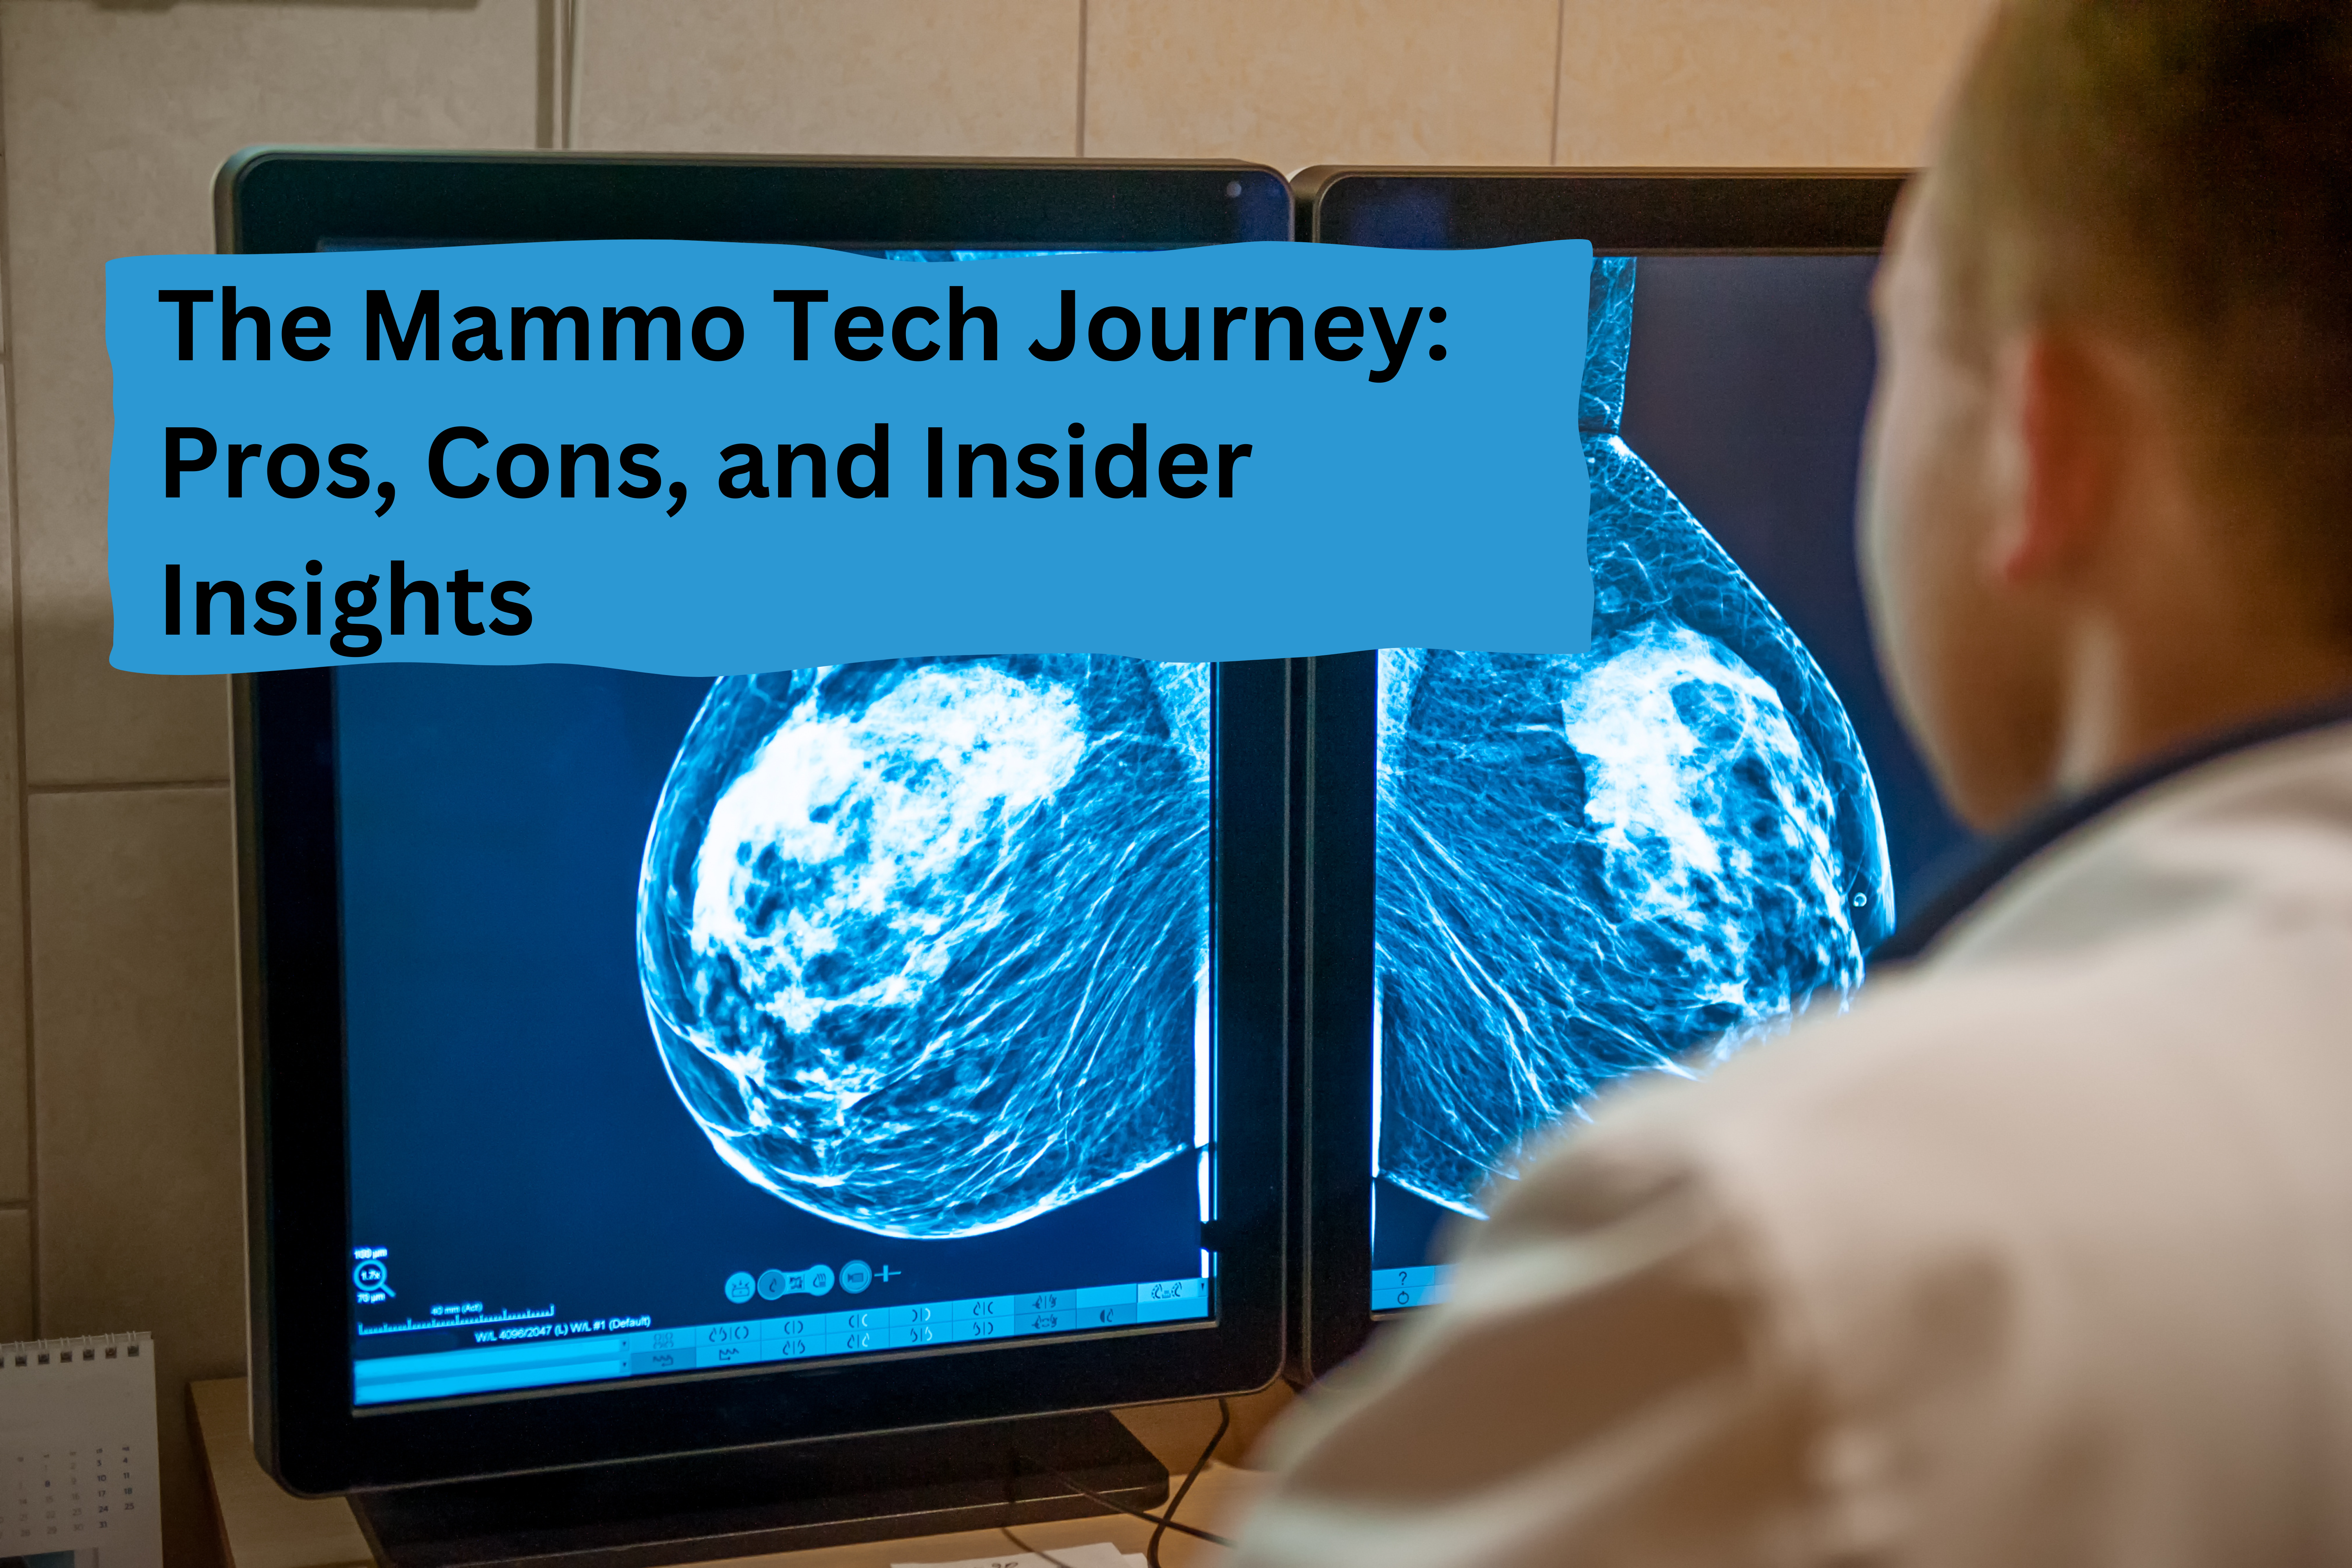 The Mammo Tech Journey: Pros, Cons, and Insider Insights